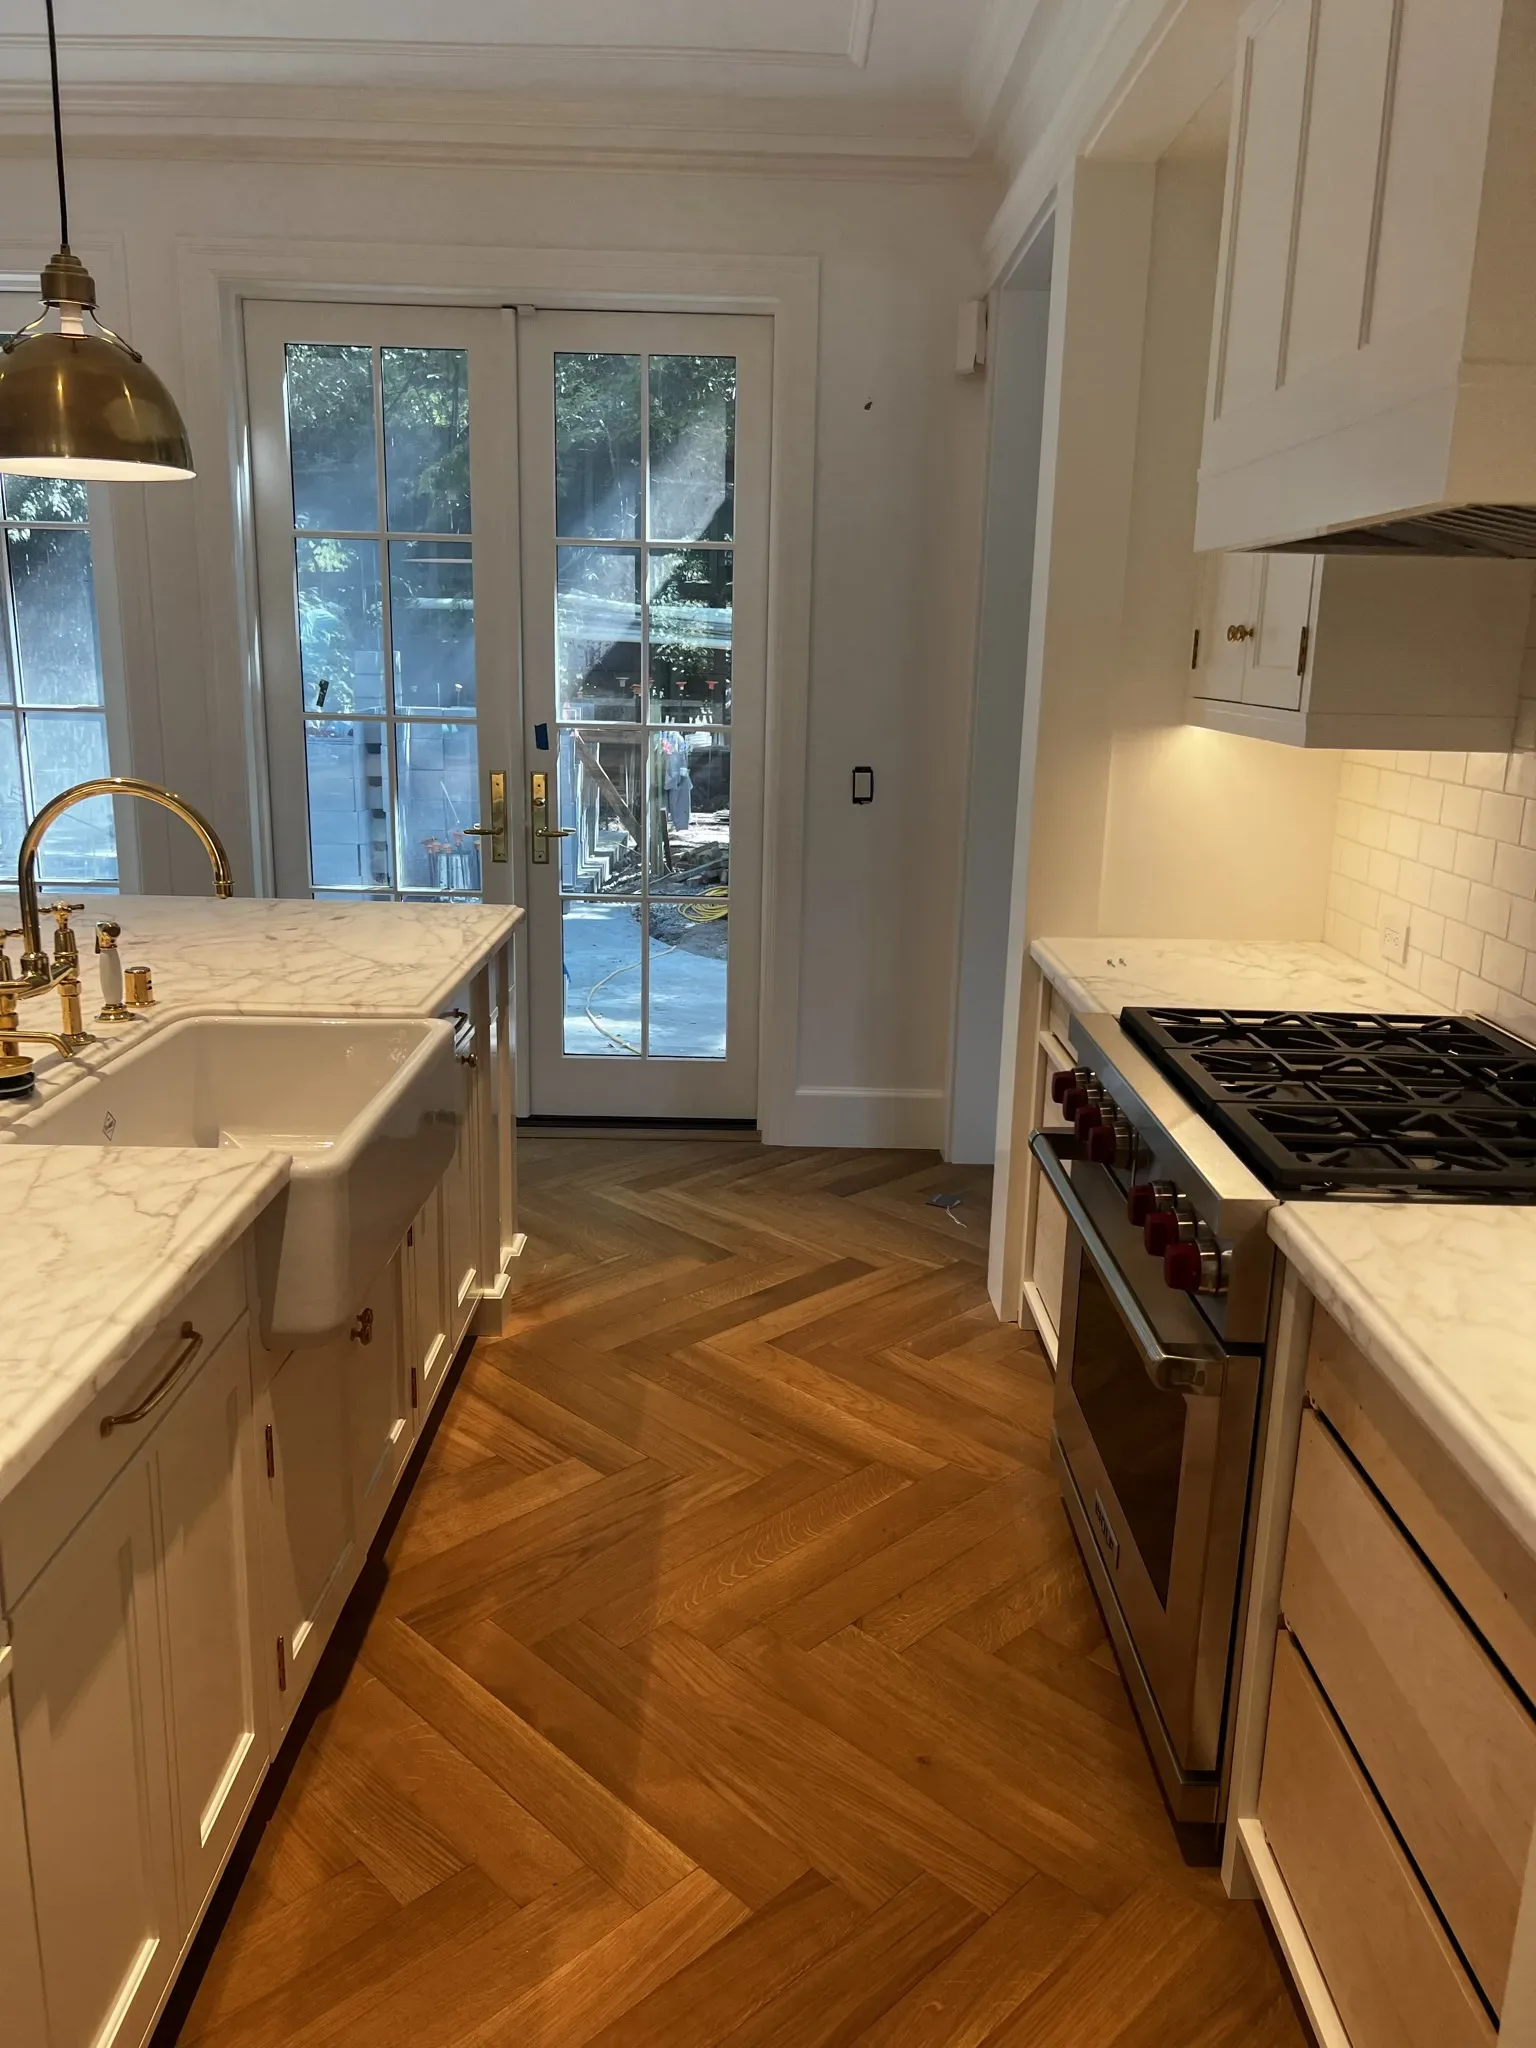 A kitchen with white cabinets and a wooden floor.